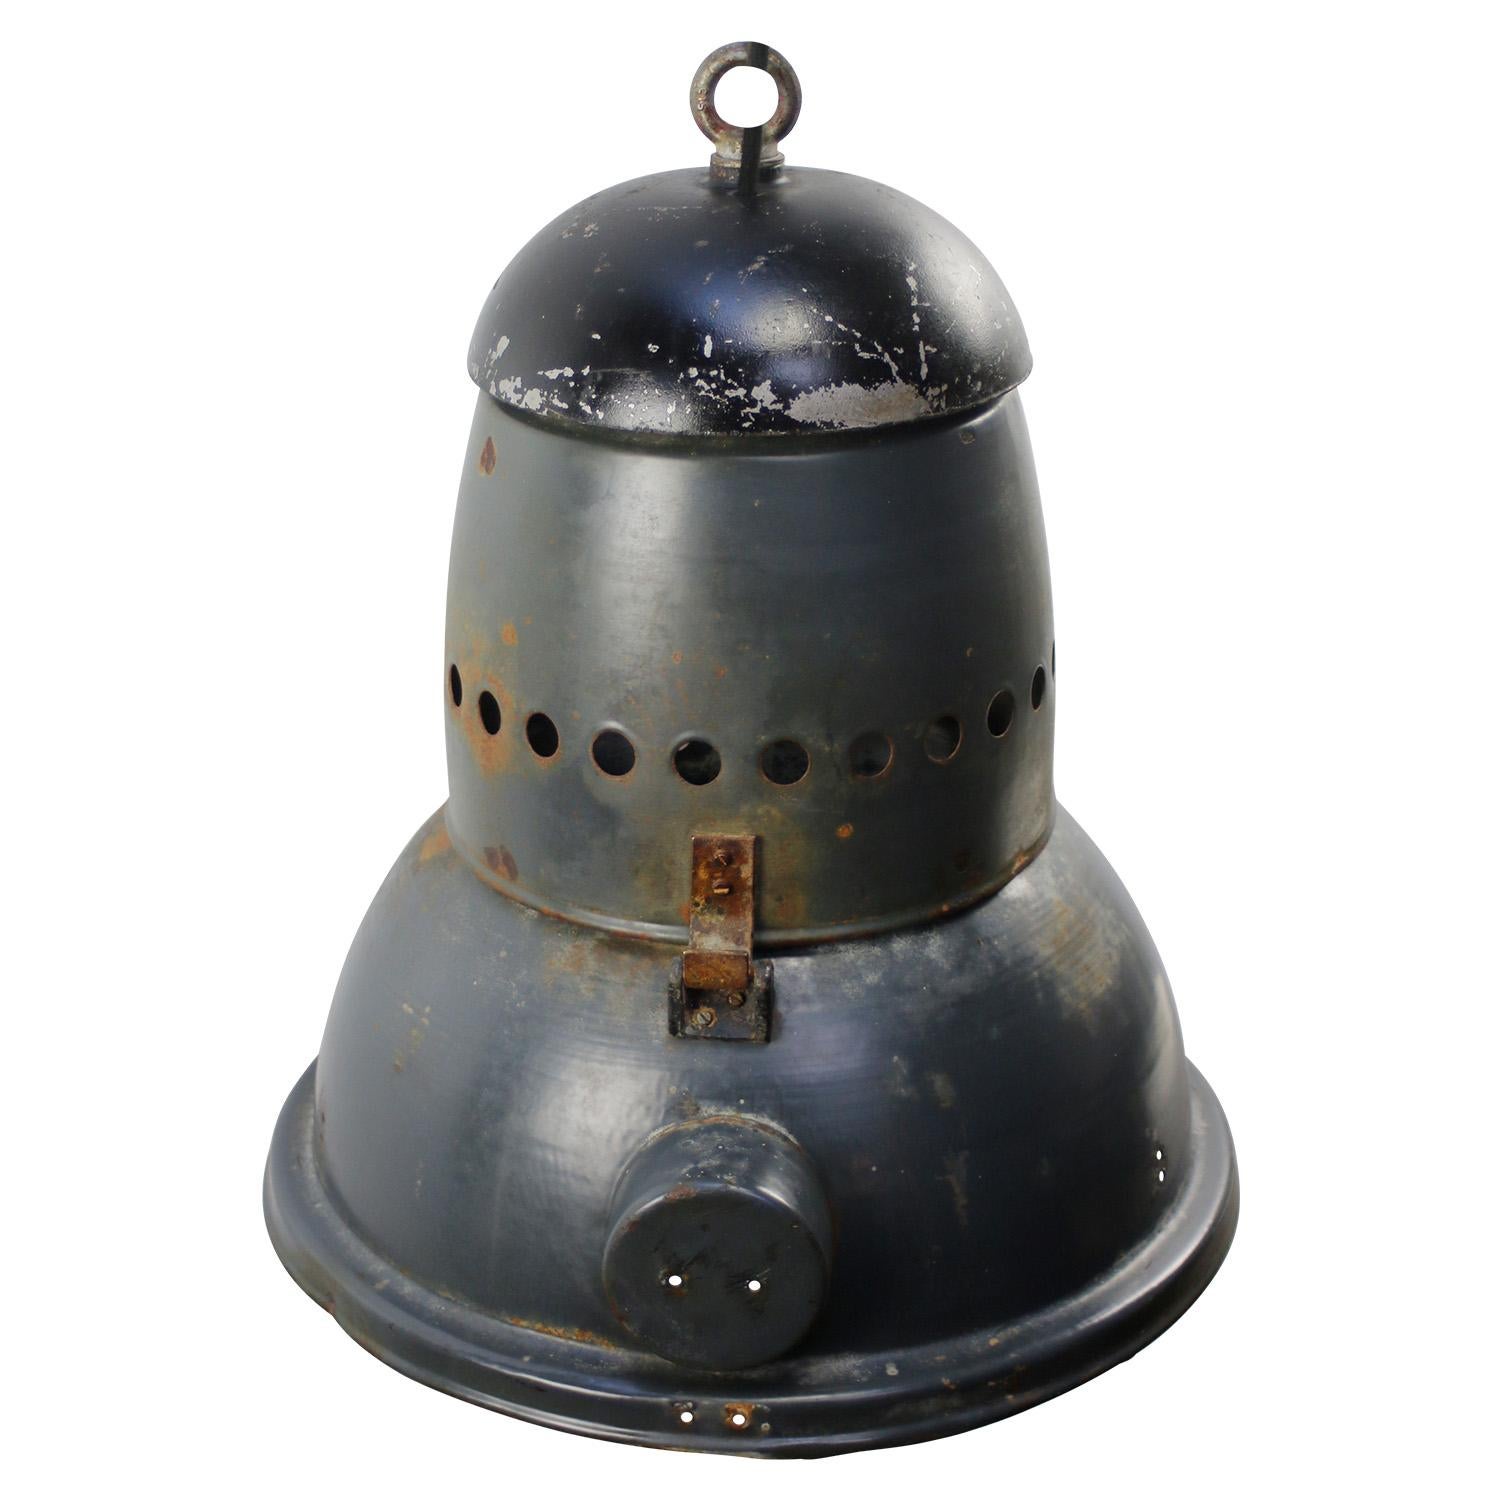 Blue enamel industrial lamp. White interior cast iron top.

Weight 7.50 kg / 16.5 lb

Priced per individual item. All lamps have been made suitable by international standards for incandescent light bulbs, energy-efficient and LED bulbs. E26/E27 bulb